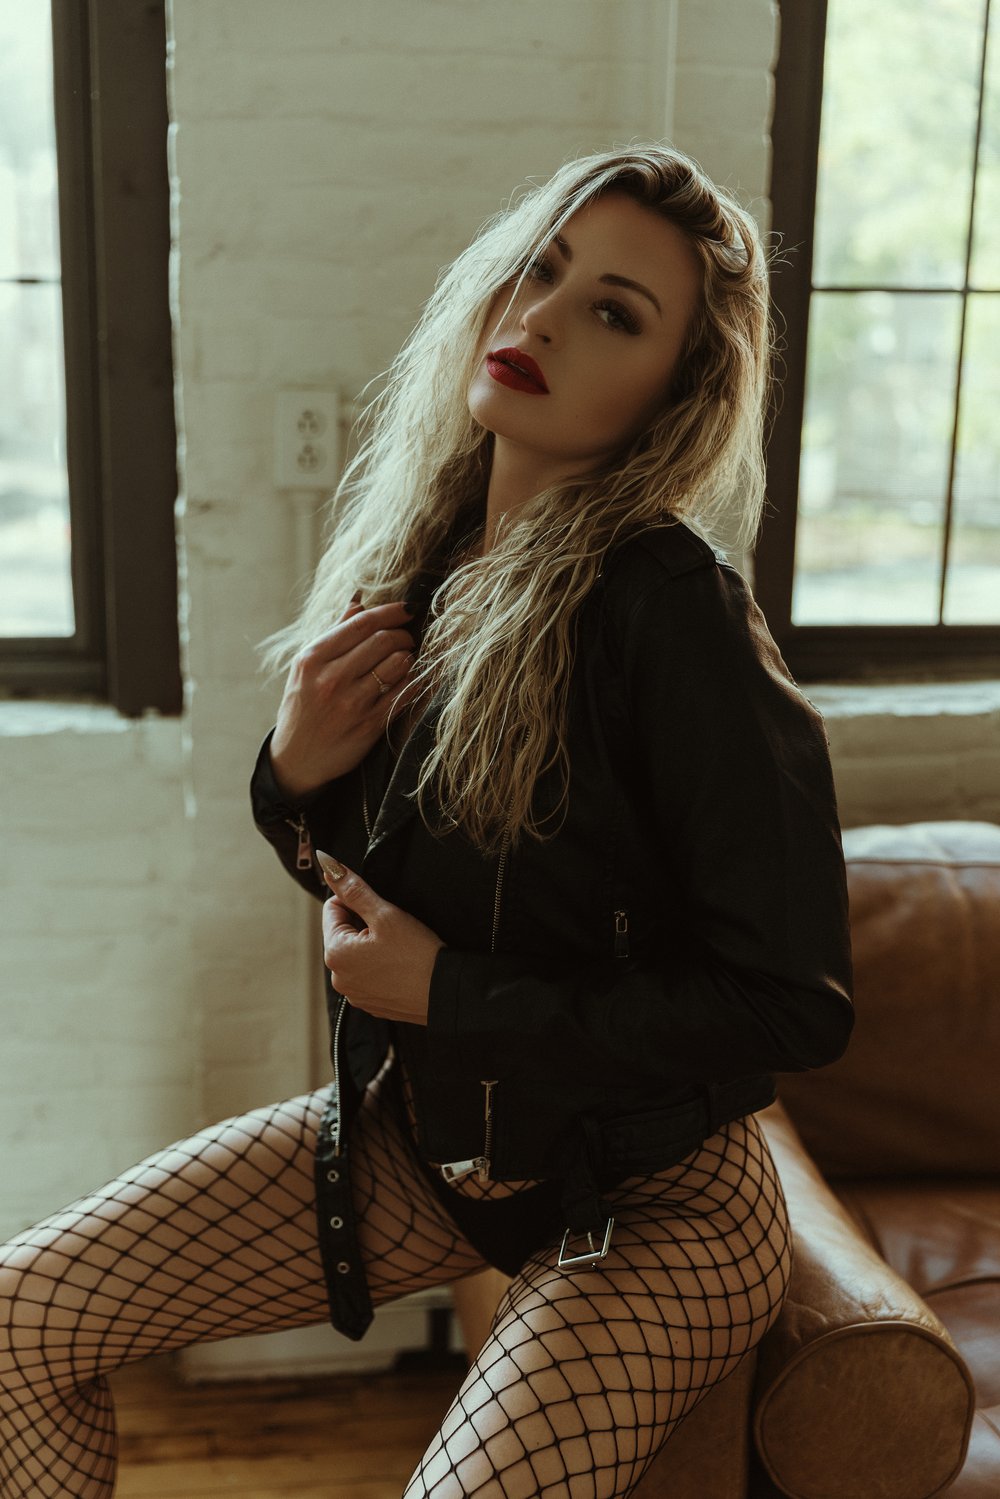 Boudoir fishnets and hand posing suggestions